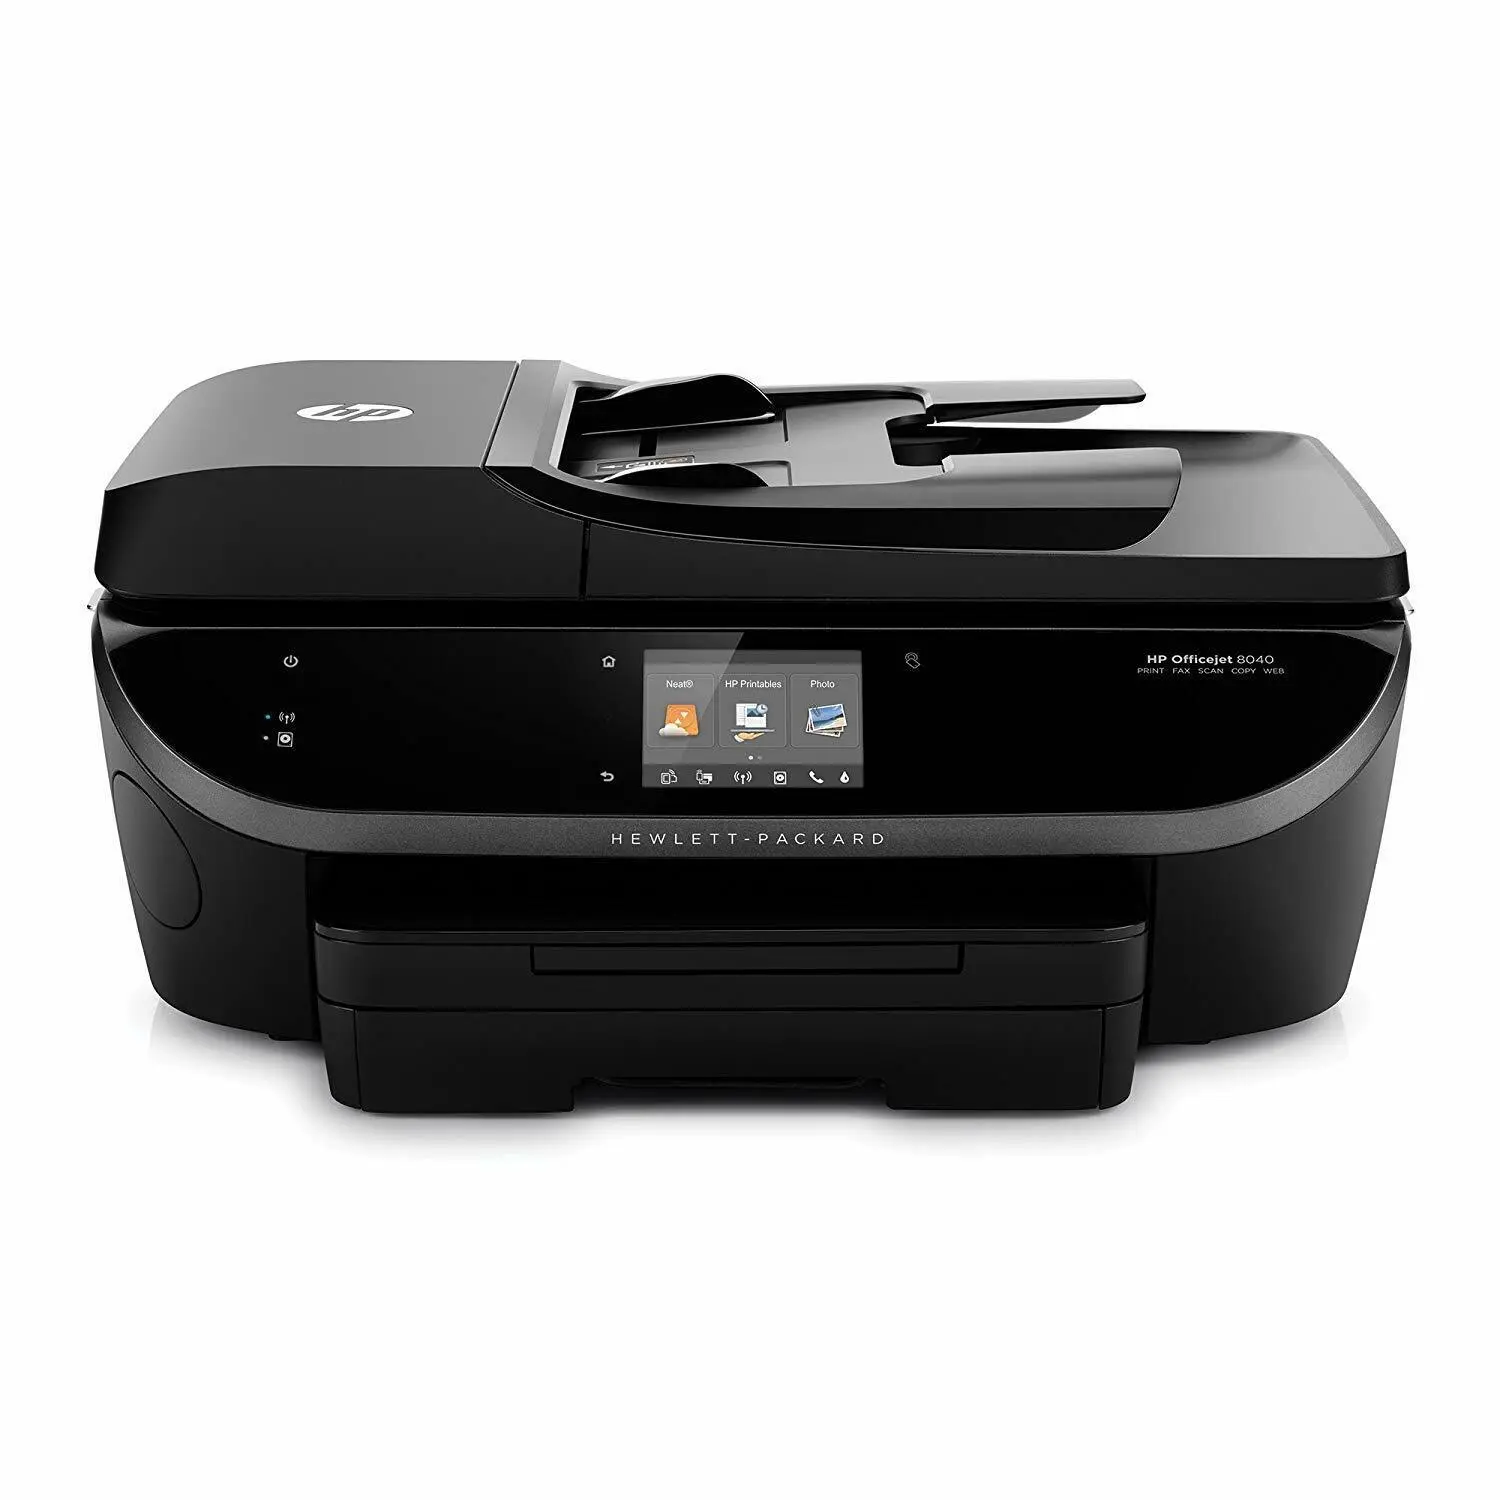 hewlett packard printer fax scanner - Do any HP printers have fax capability